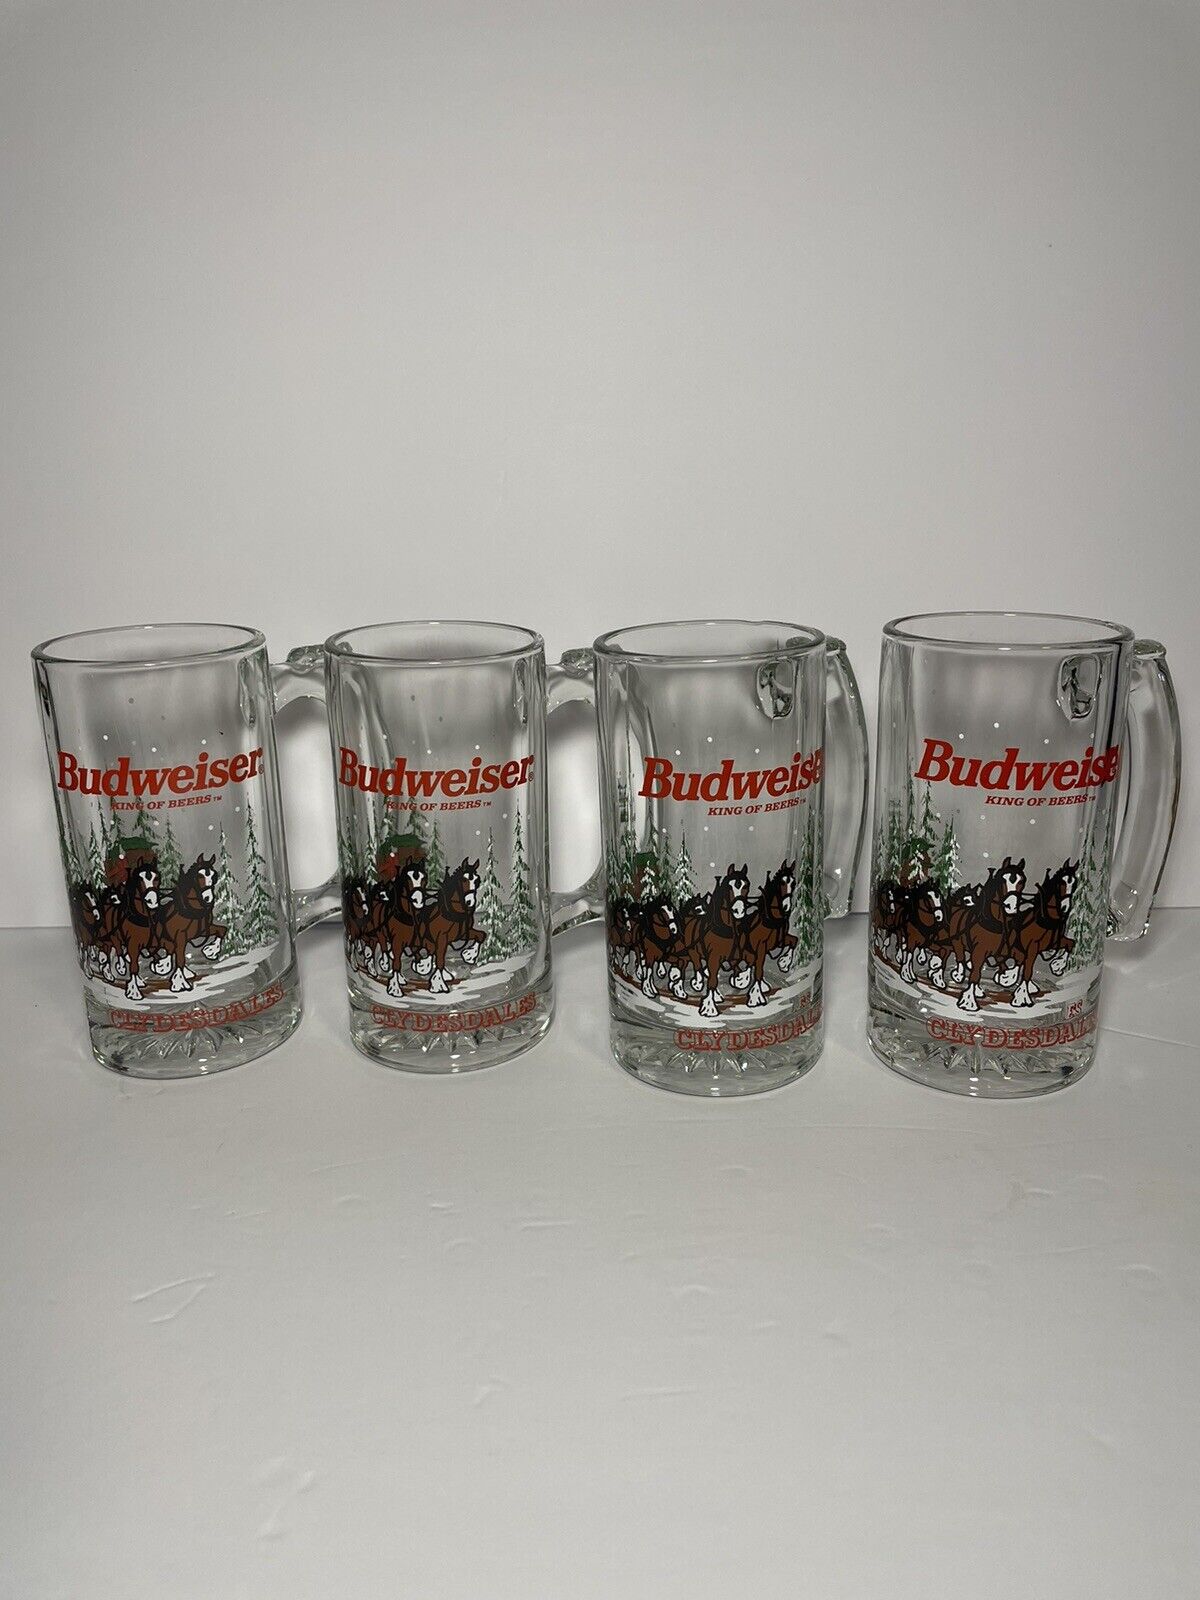 4 - 1989 Vintage Clydesdales Budweiser Collectible Holiday Glass 12 oz Beer Mugs